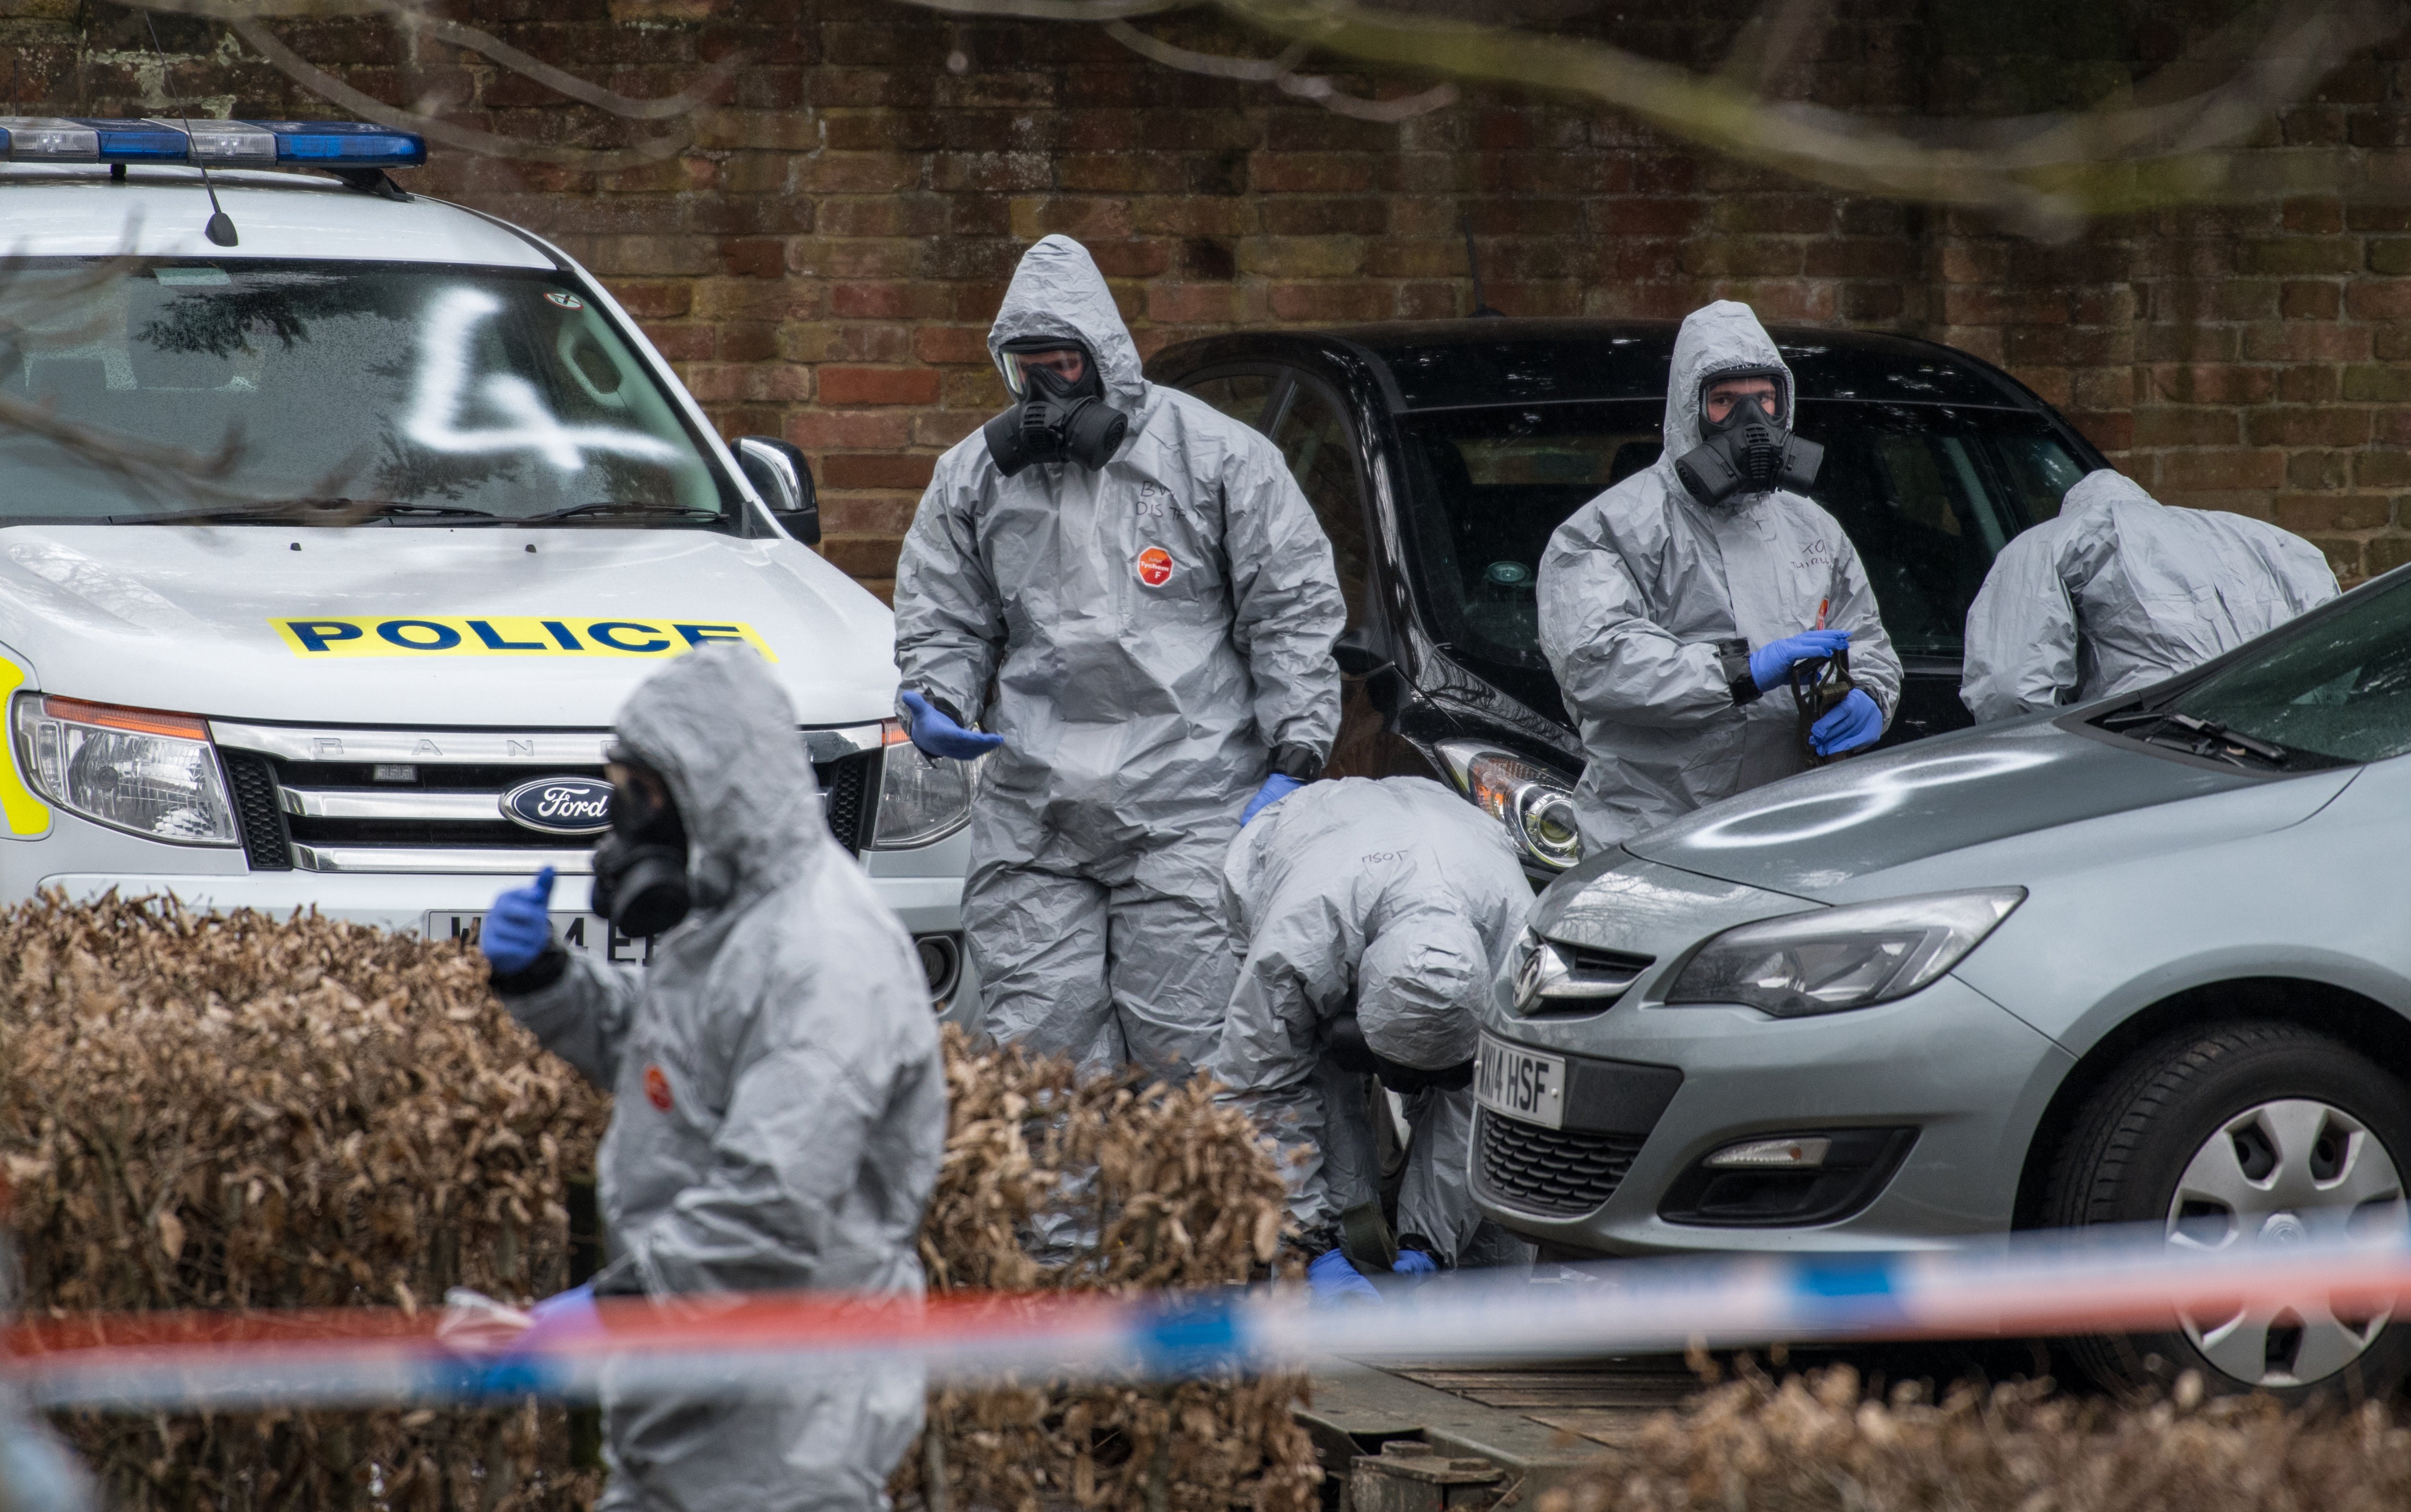 Britain told the United Nations Security Council in 2018 that the Salisbury poisoning ‘was an unlawful use of force’